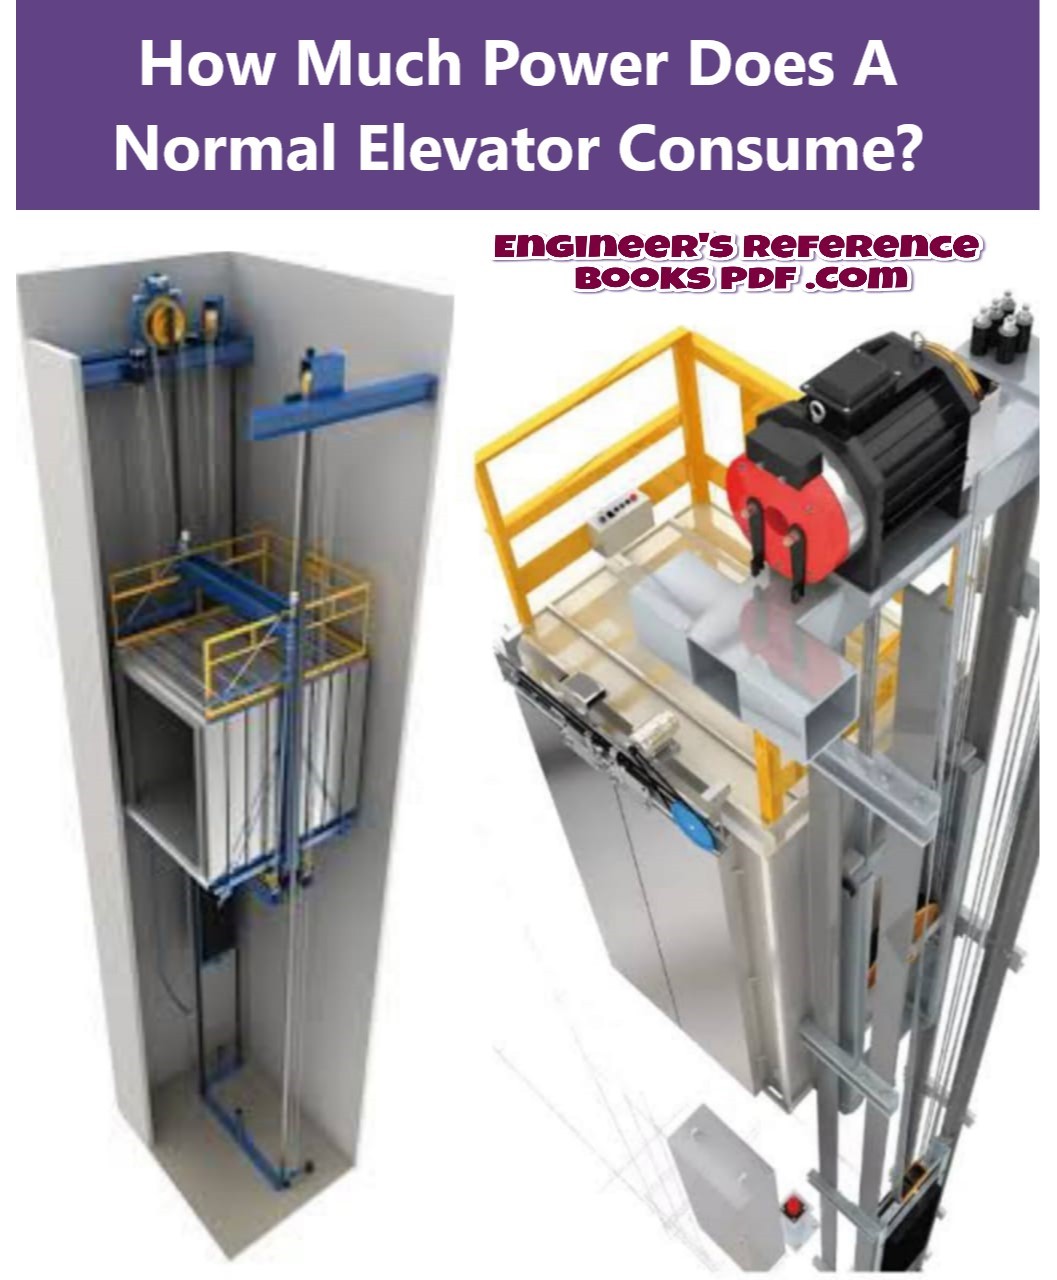 How Much Power Does A Normal Elevator Consume?
